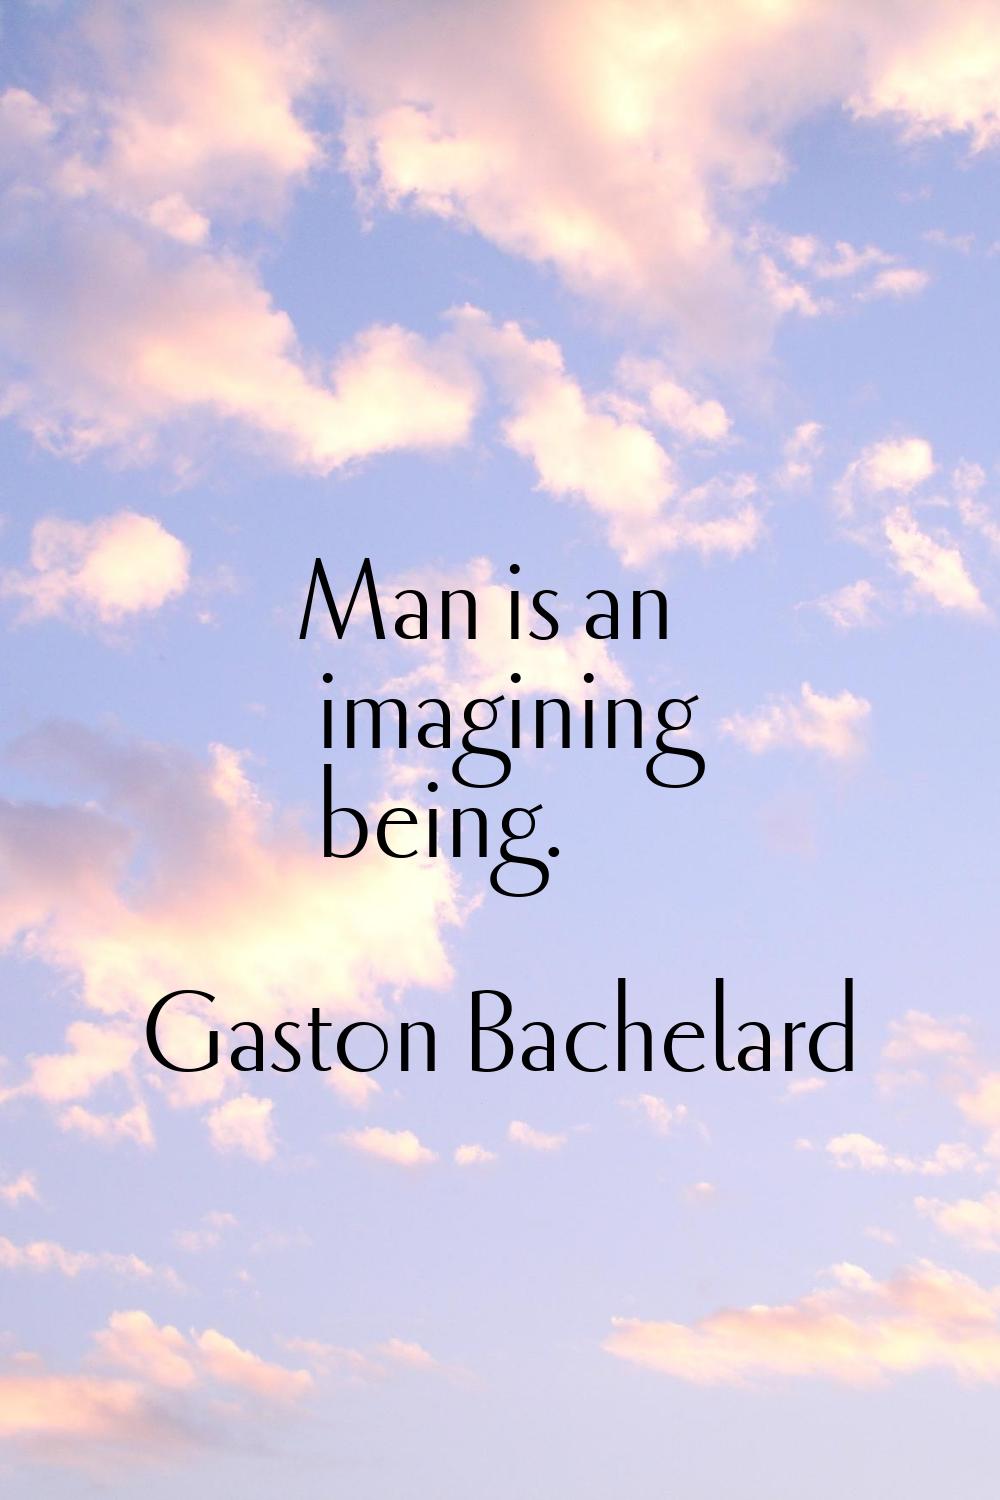 Man is an imagining being.